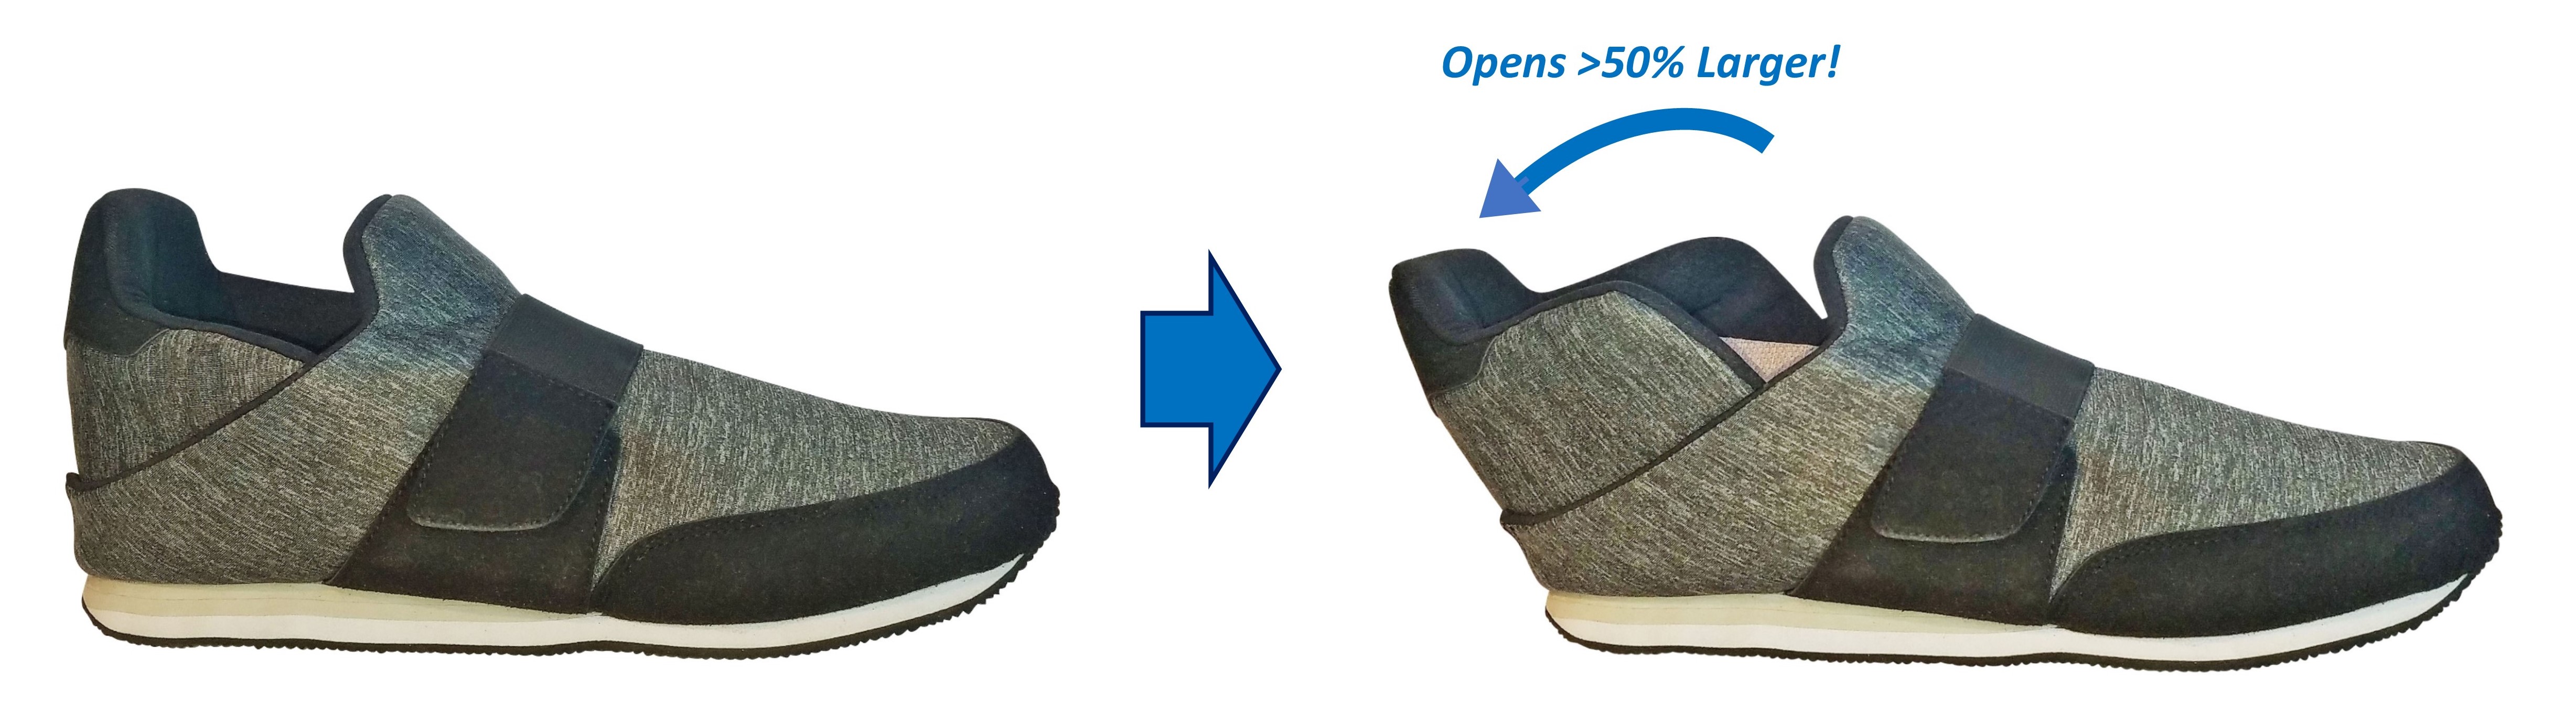 Quikiks Hands-Free Shoes open >50% larger than typical footwear